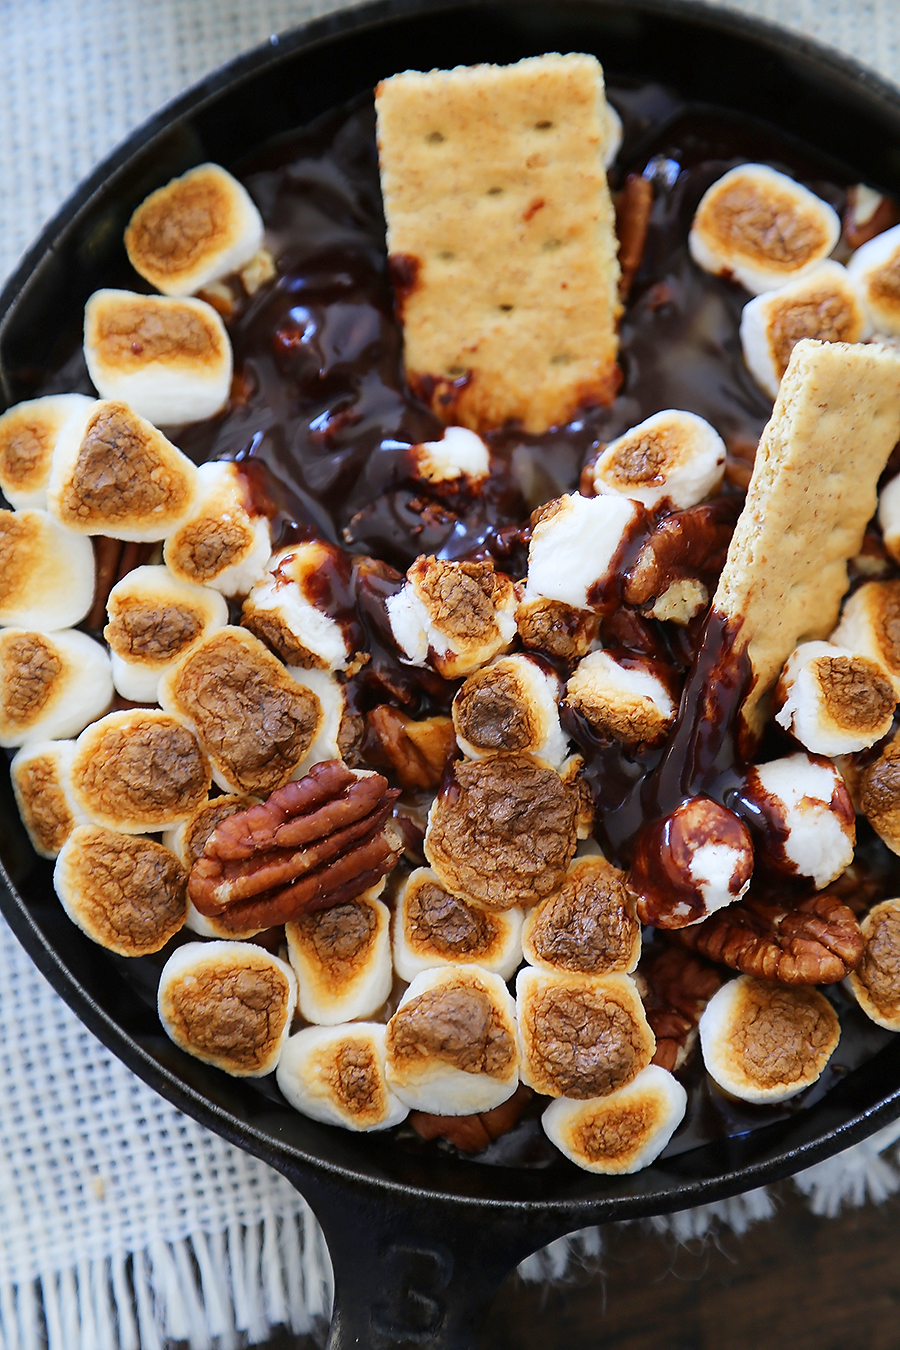 5-Ingredient Caramel Pecan S'mores Dip - Perfect for parties! Loaded with creamy caramel and pecans, this treat is super quick and easy! thecomfortofcooking.com